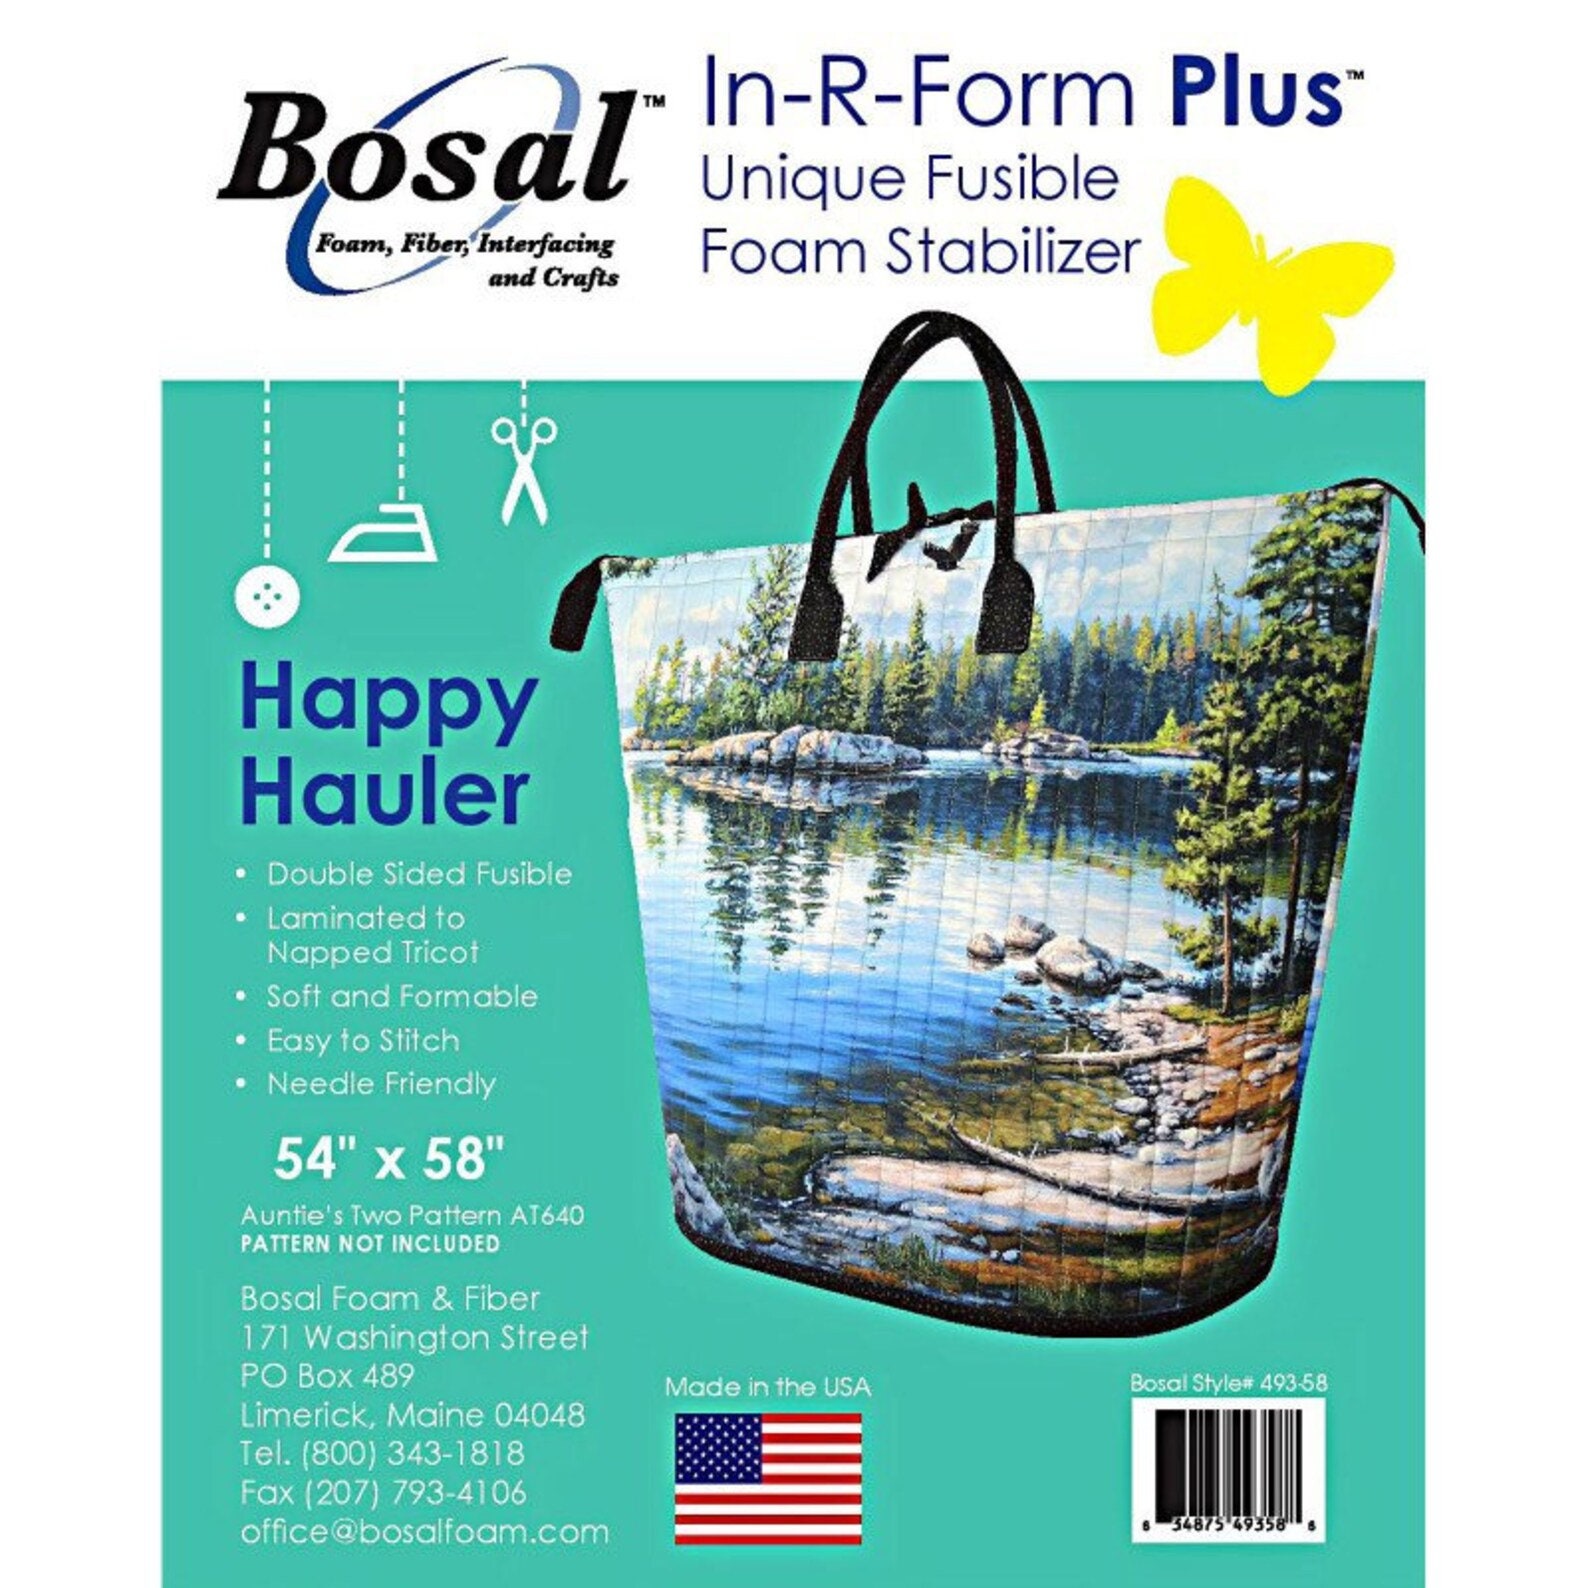 Bosal 18 X 58 in R Form Plus Double Side Fusible Foam Stabilizer Katahdin  Tote Auntie's Two AT641 Napped Tricot Soft Formable 493-18 